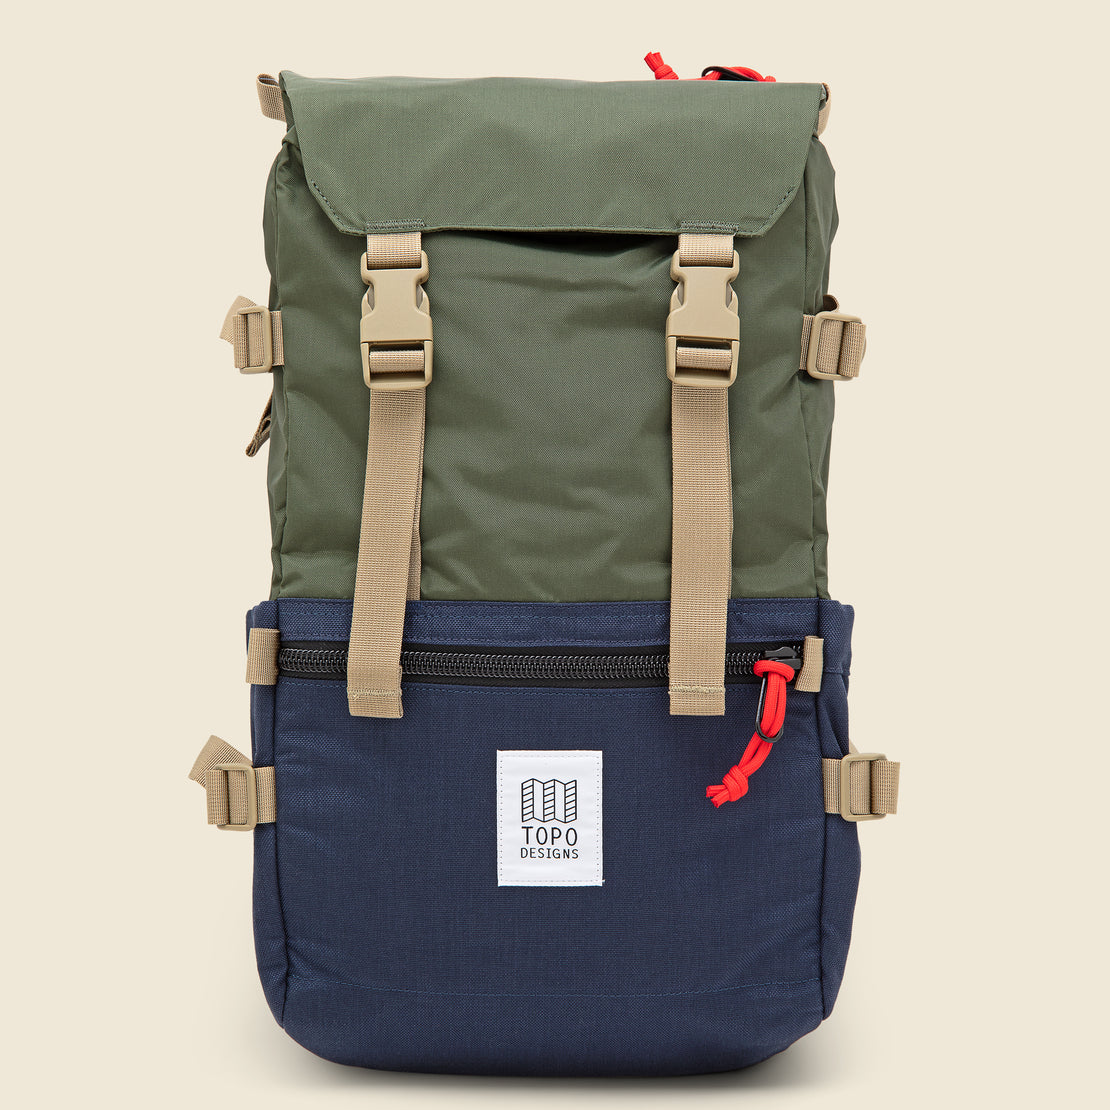 Topo Designs Rover Pack Classic - Olive/Navy